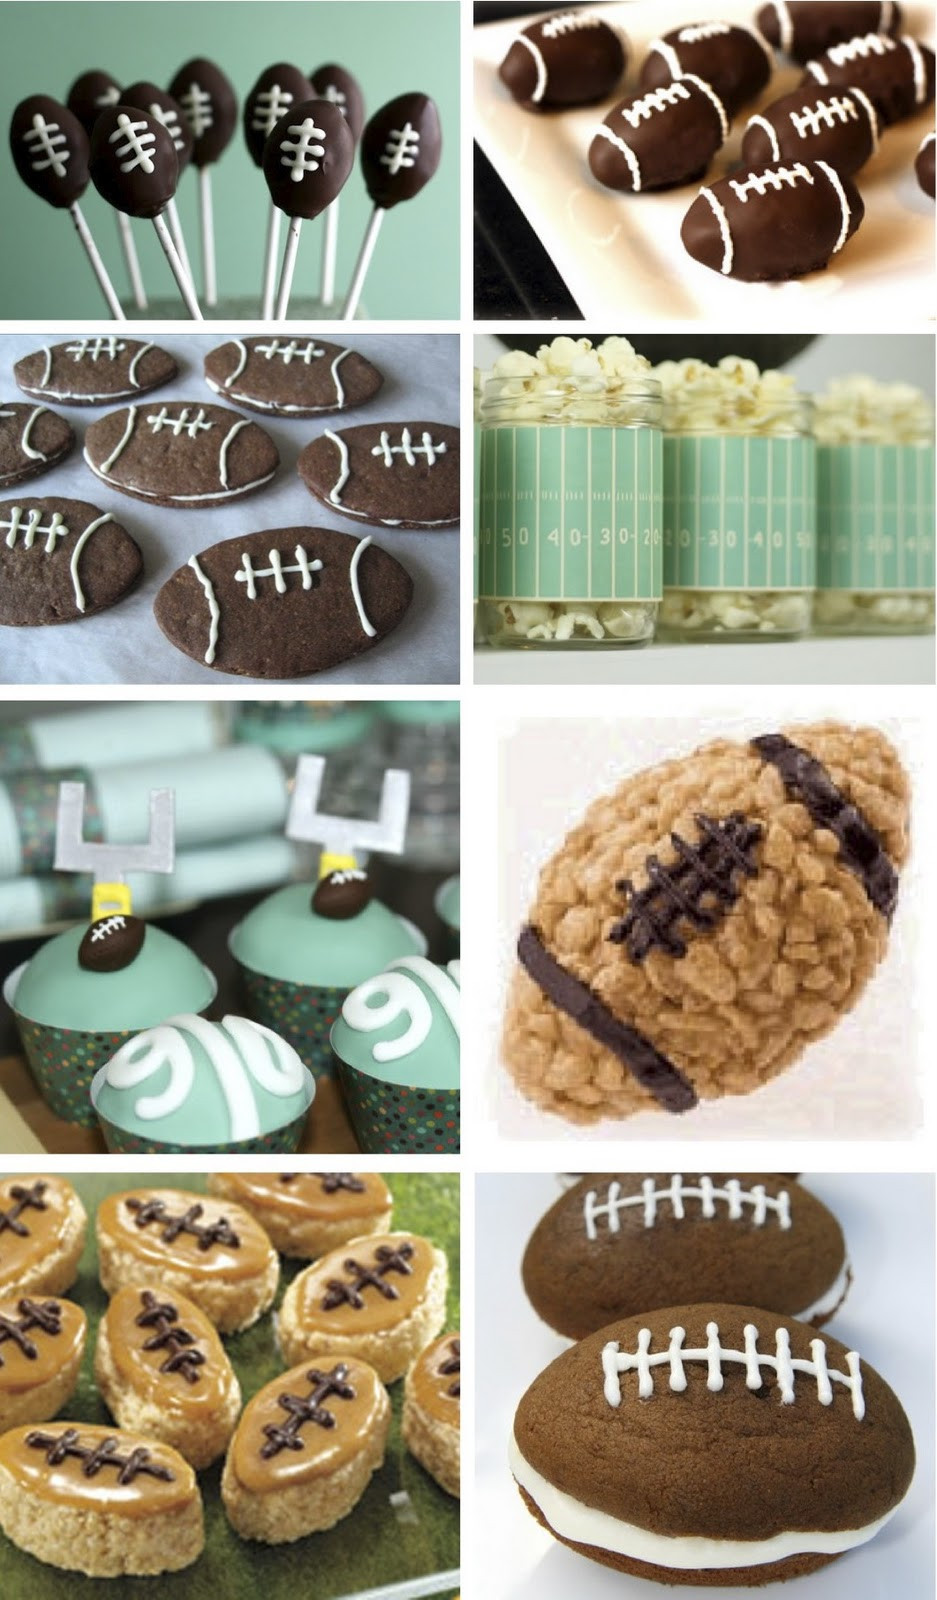 Football Party Desserts
 Room For Dessert